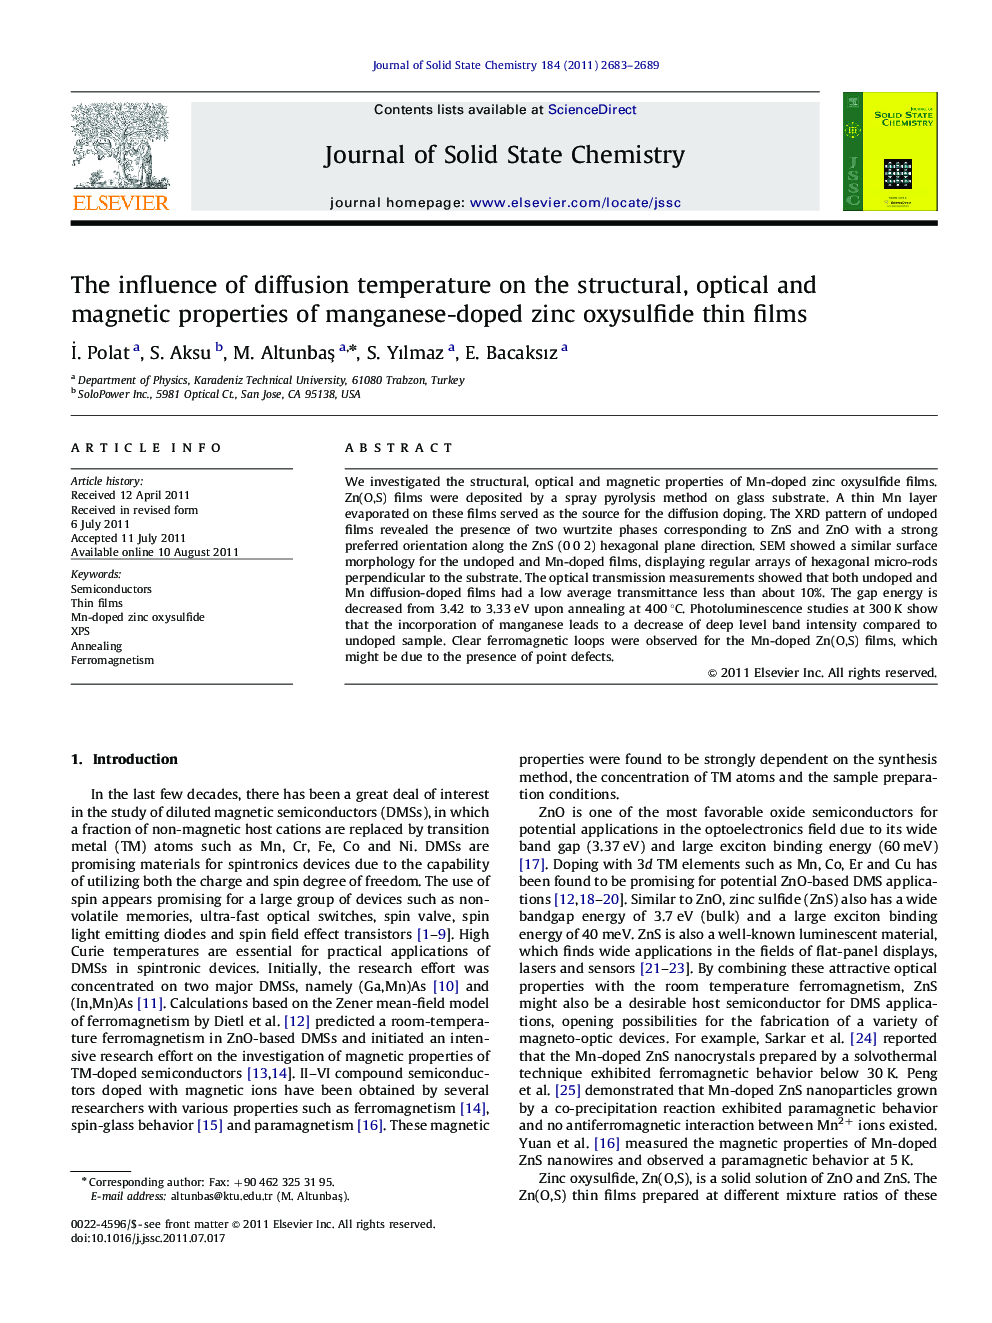 The influence of diffusion temperature on the structural, optical and magnetic properties of manganese-doped zinc oxysulfide thin films